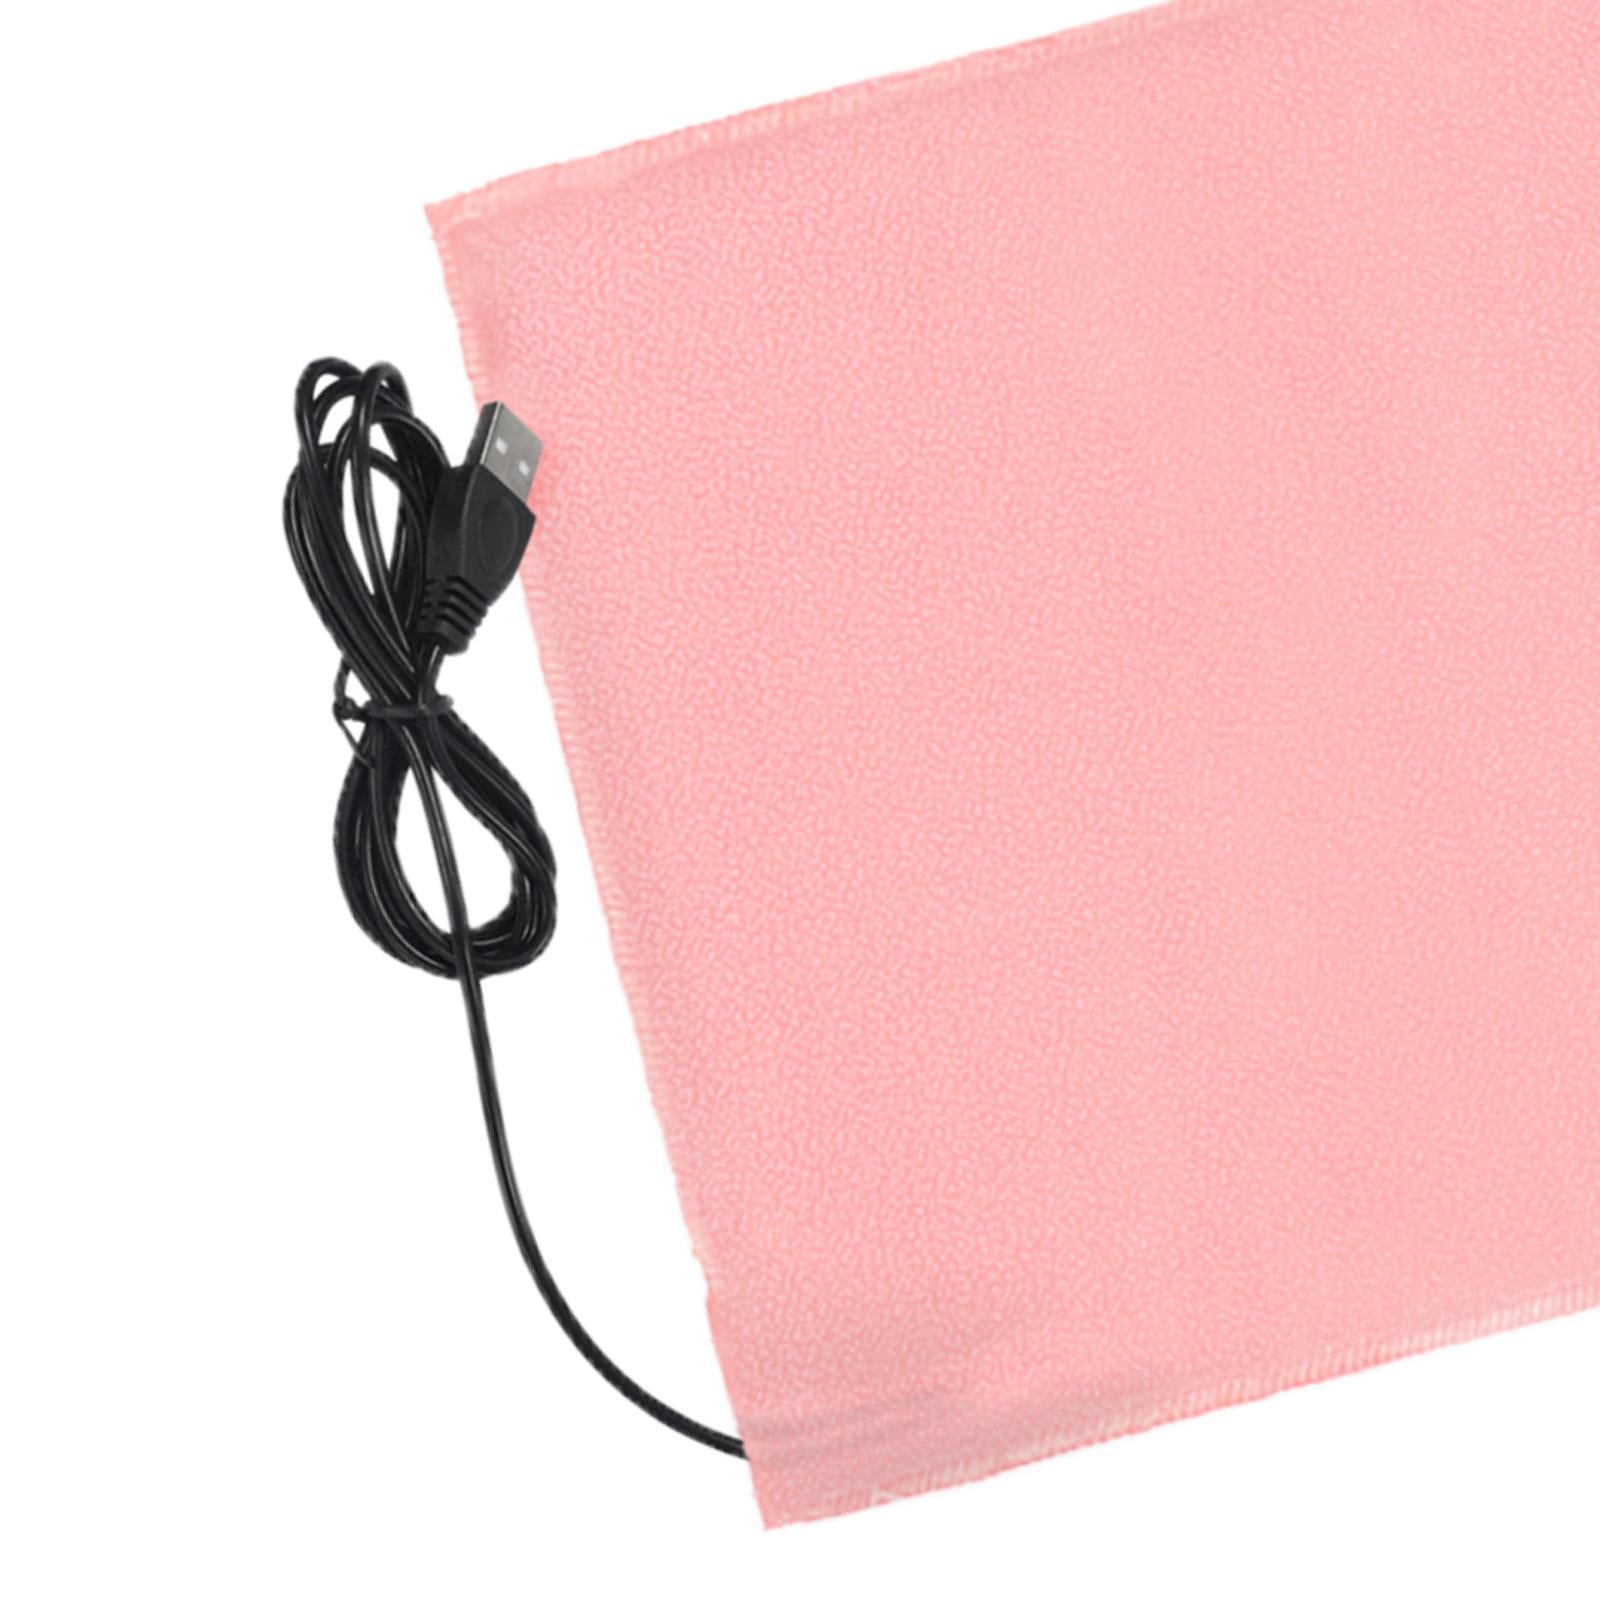 USB Electric Heating Pad Foldable Washable Adjustable for Shoulders pink